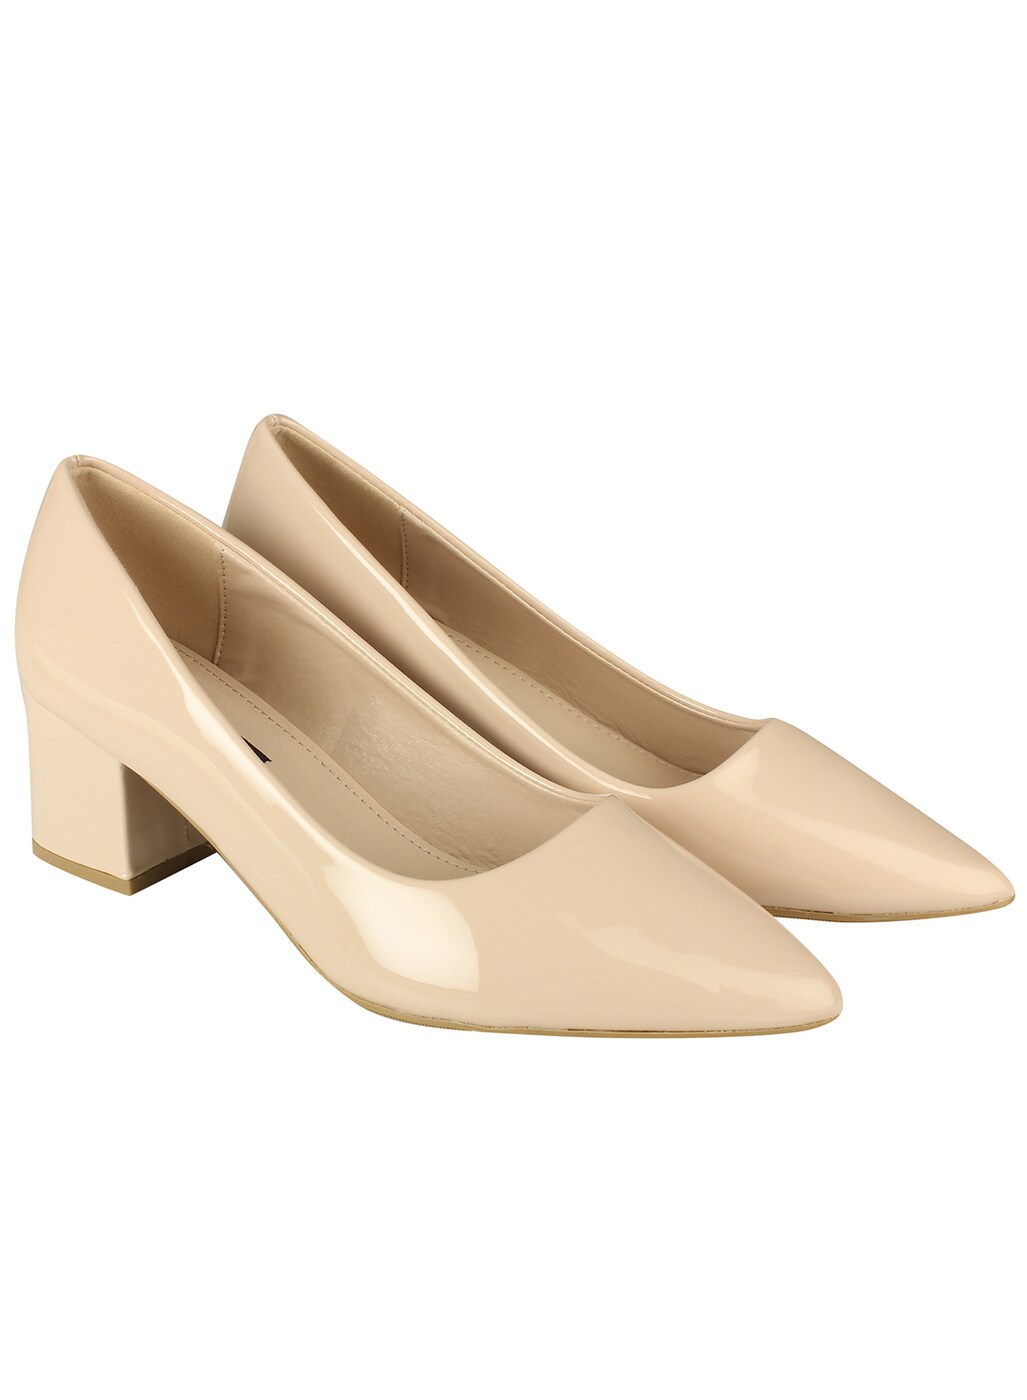 Buy Beige Shoes for by Flat n Online | Ajio.com